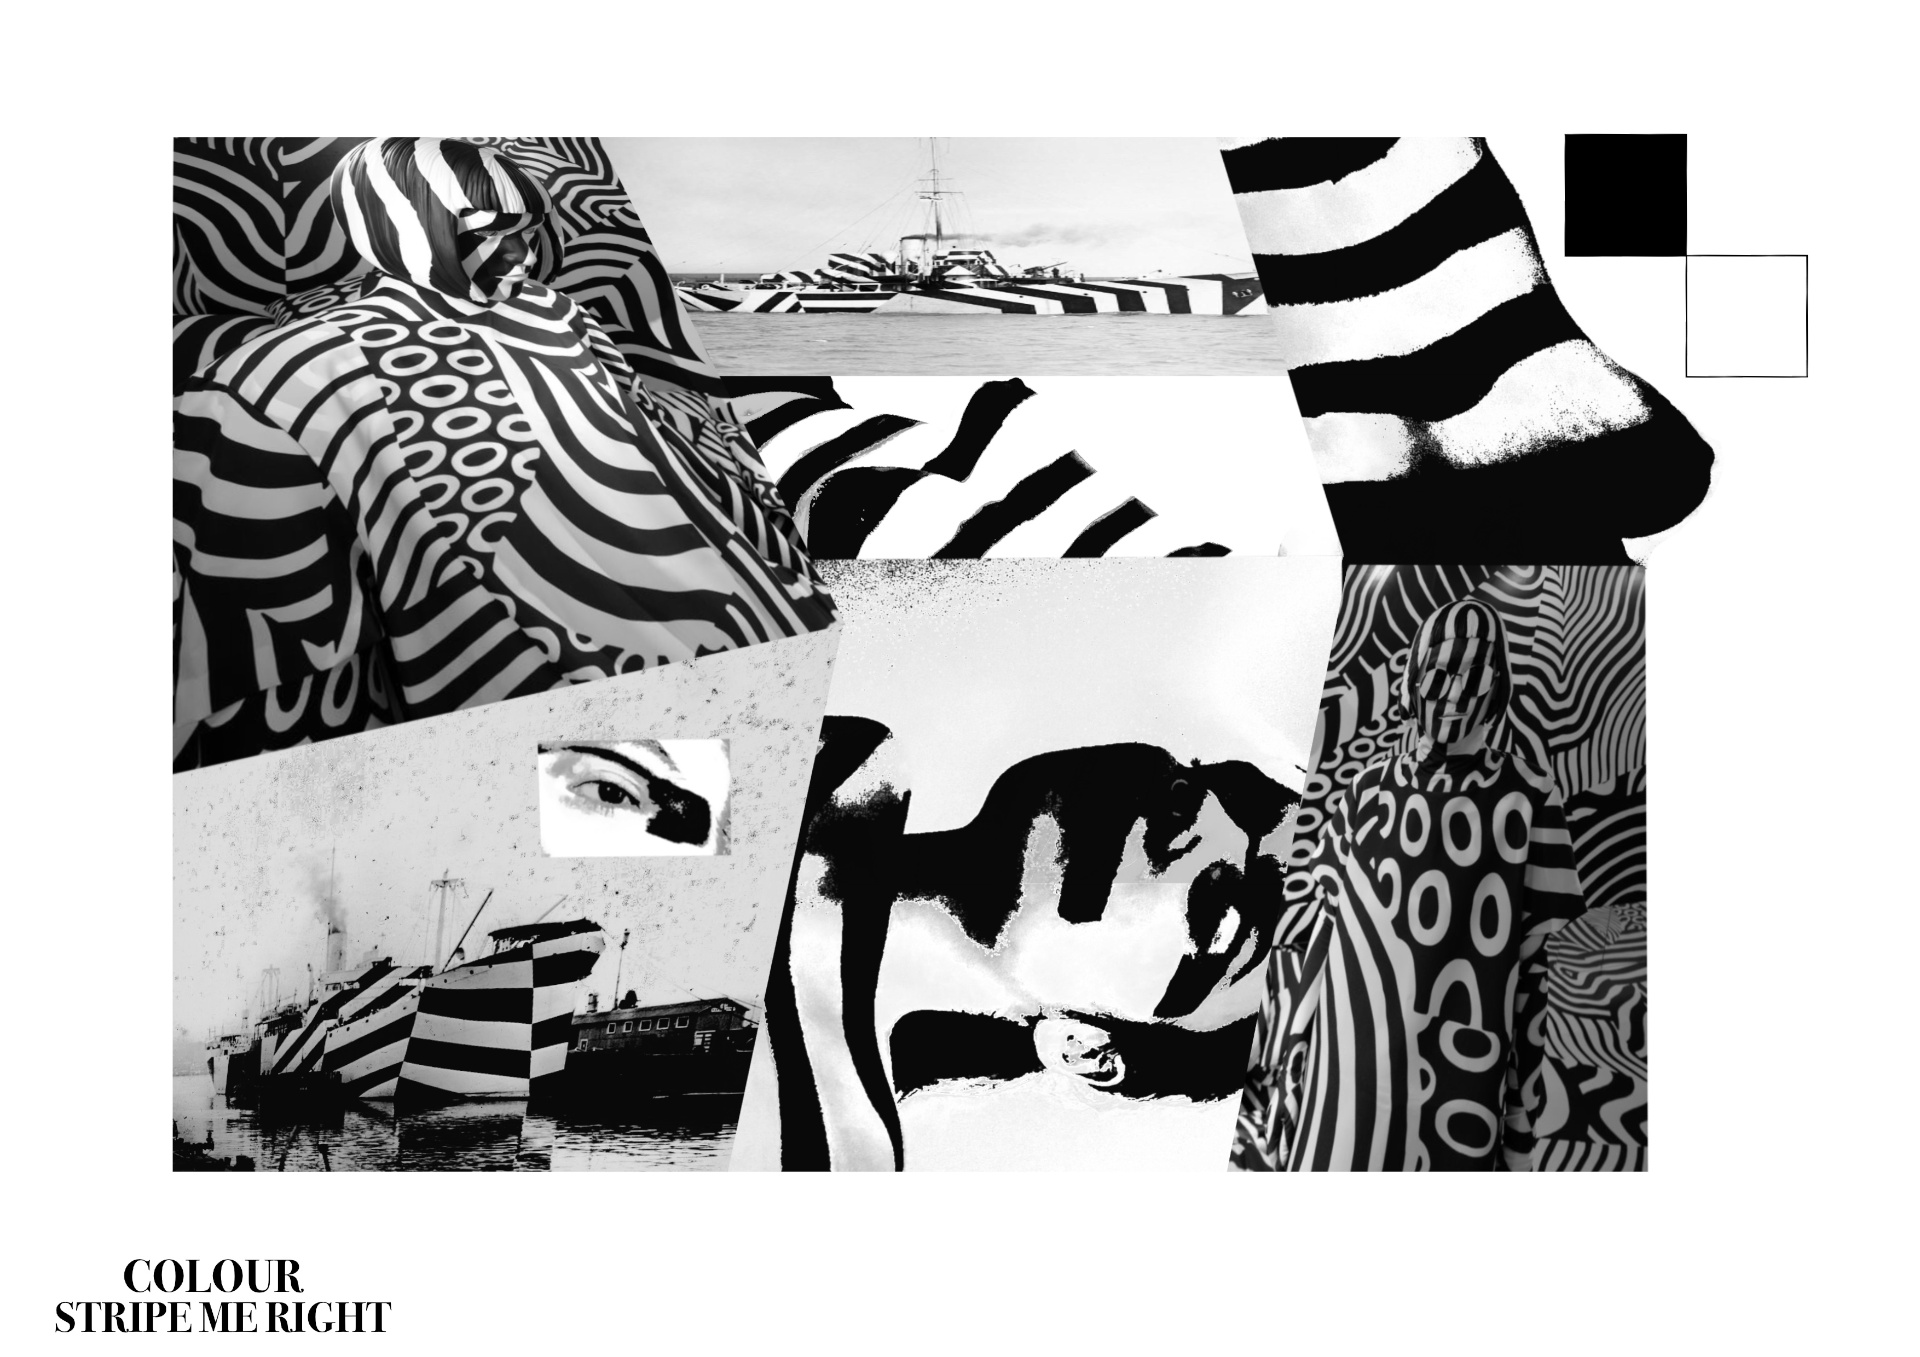 Photos and images of black-and-white striped objects and vehicles